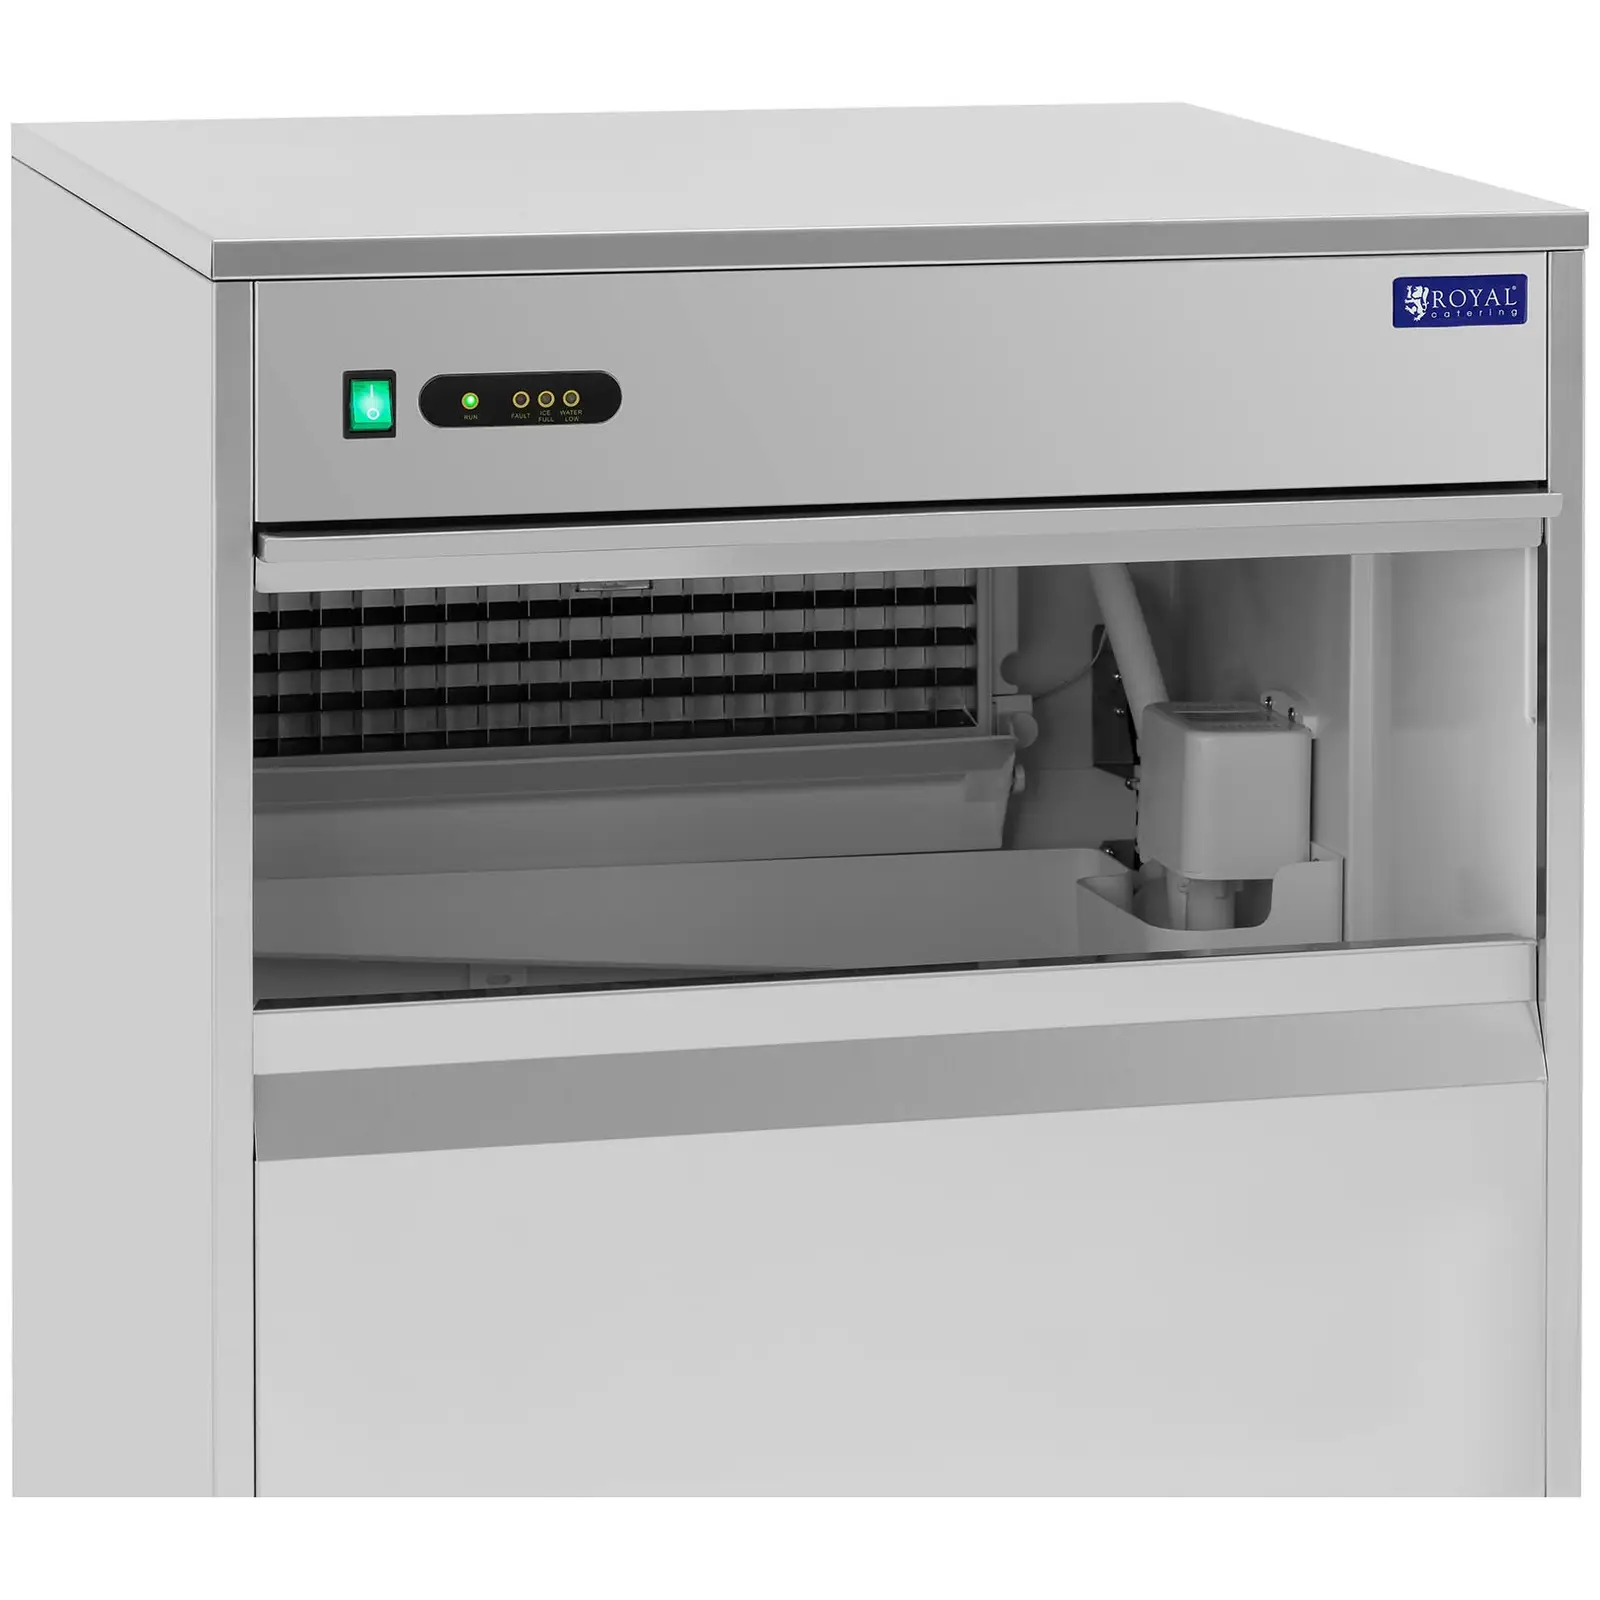 Ice Maker Machine - 80 kg/24 h - 55 kg capacity - 470 W - Stainless steel - Royal Catering